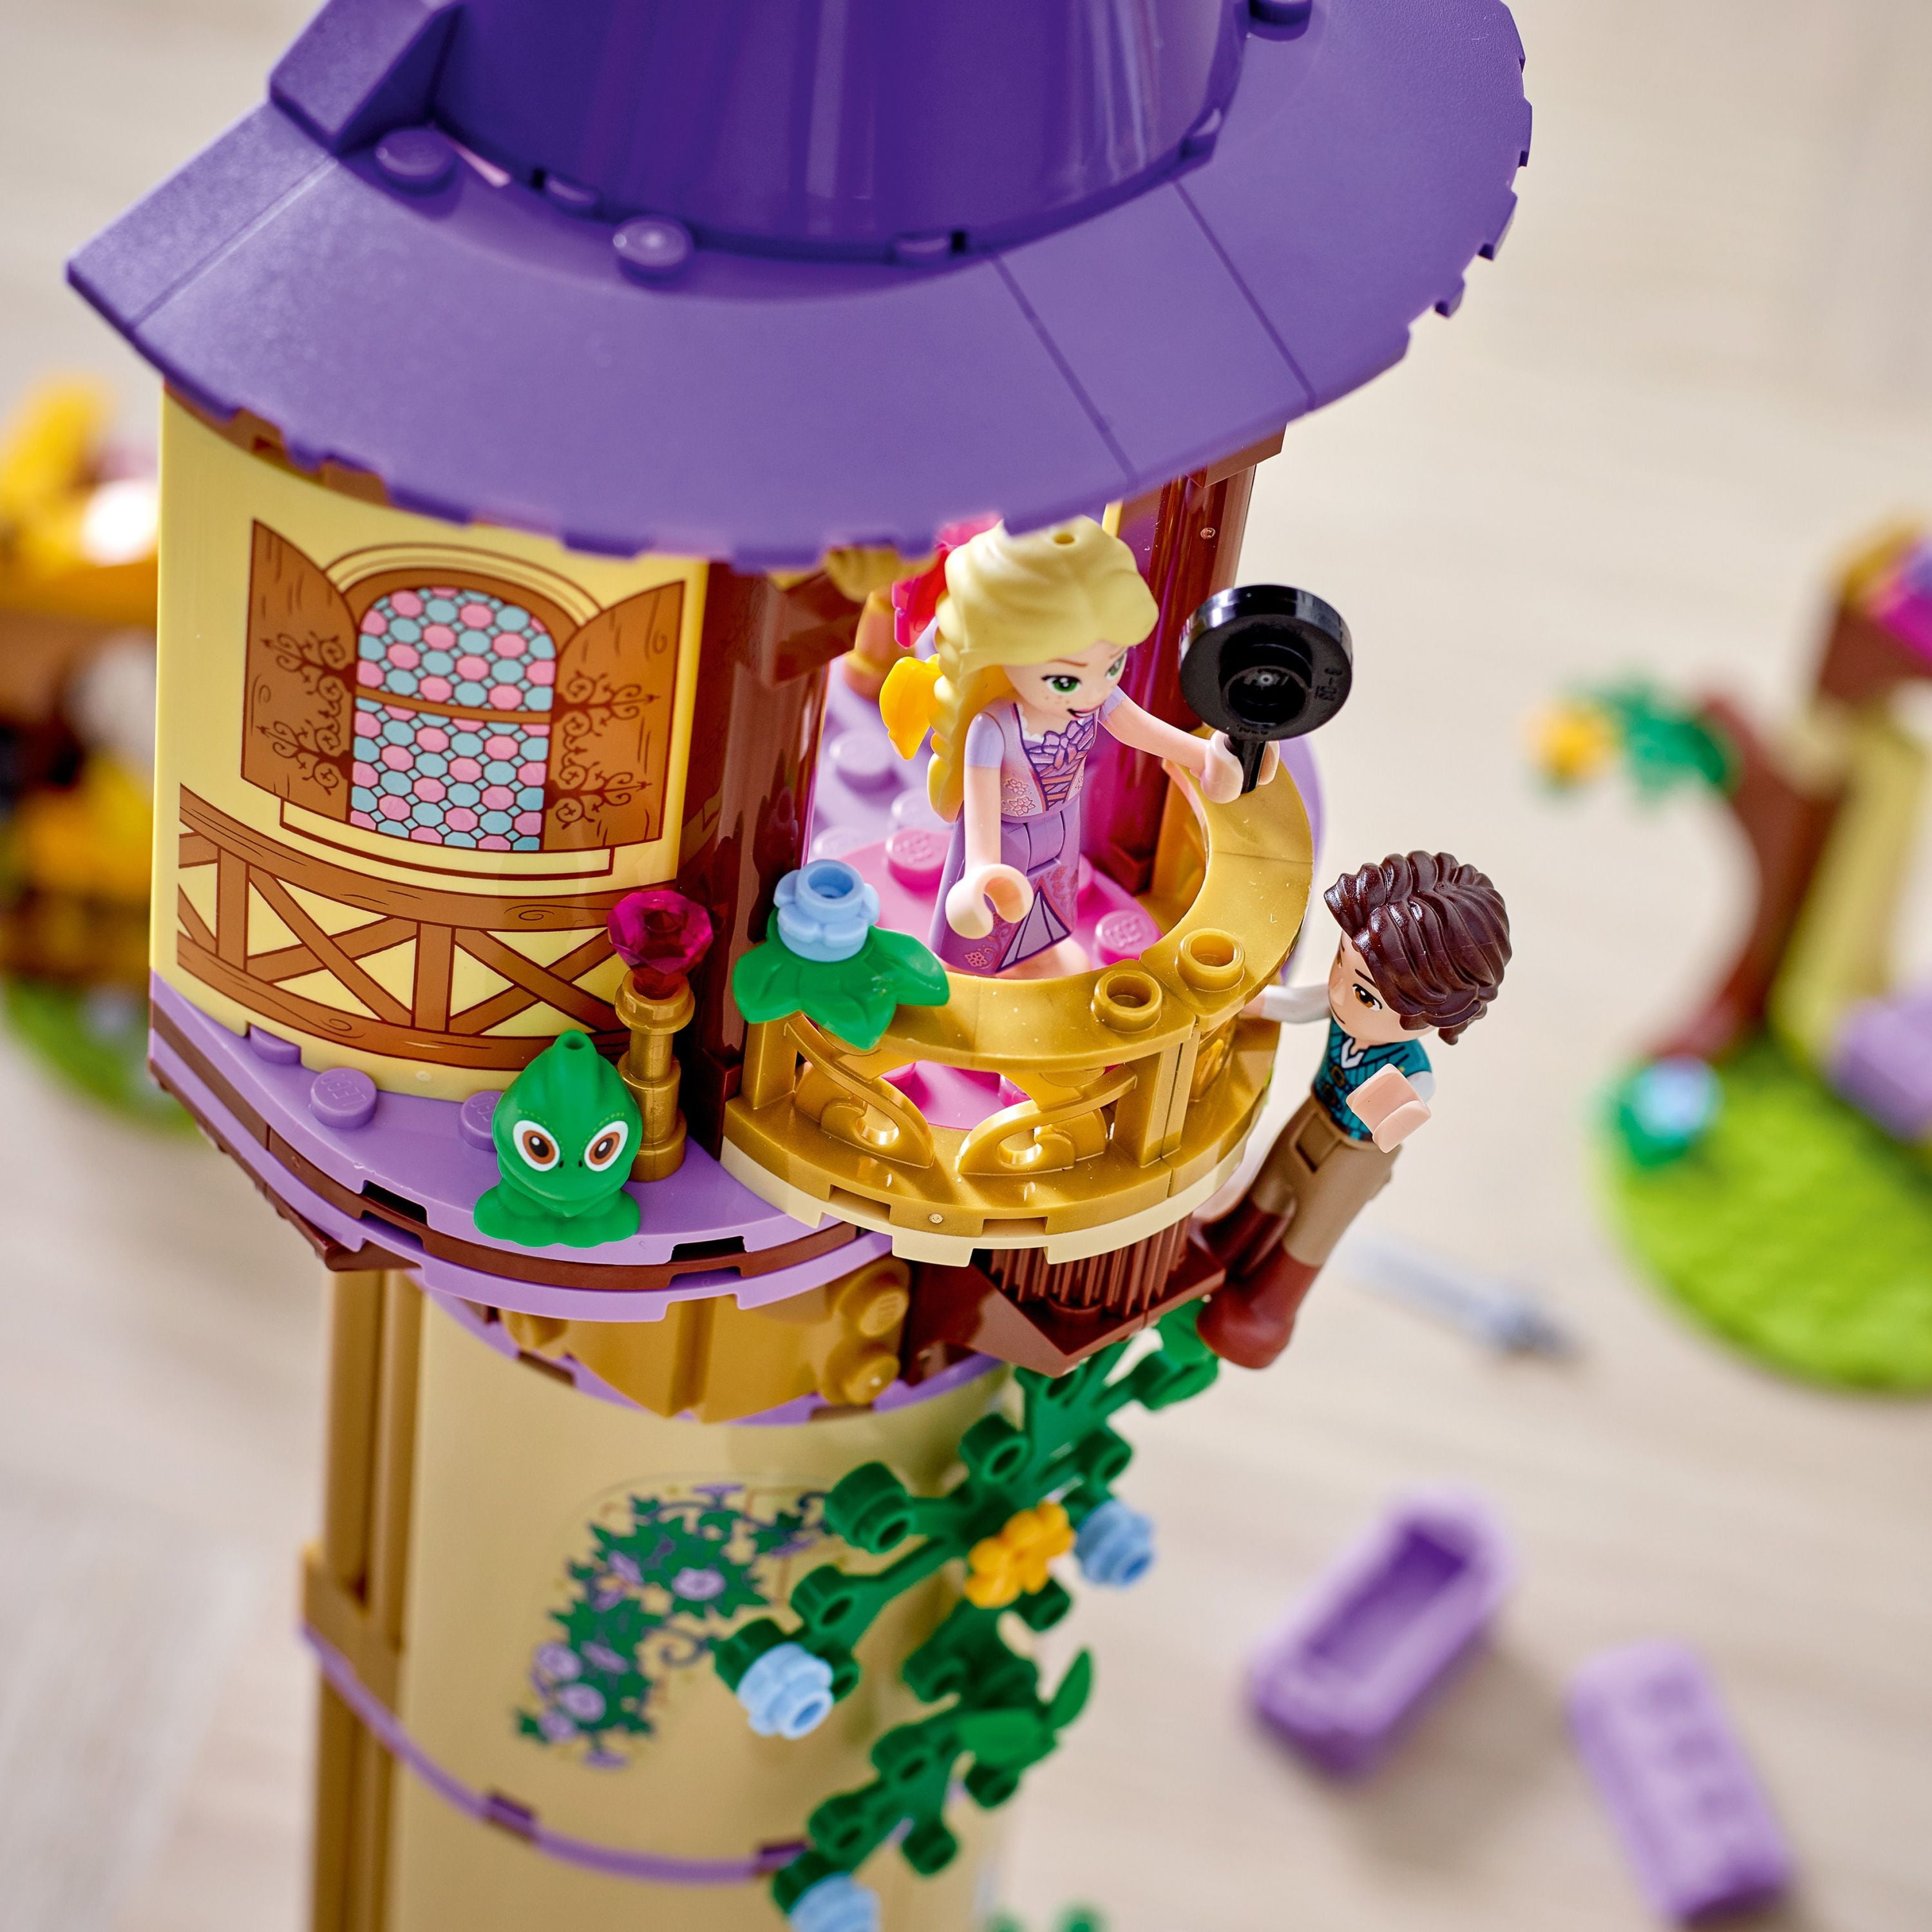 Rapunzel in Escape from the Tower - LEGO Disney Princess